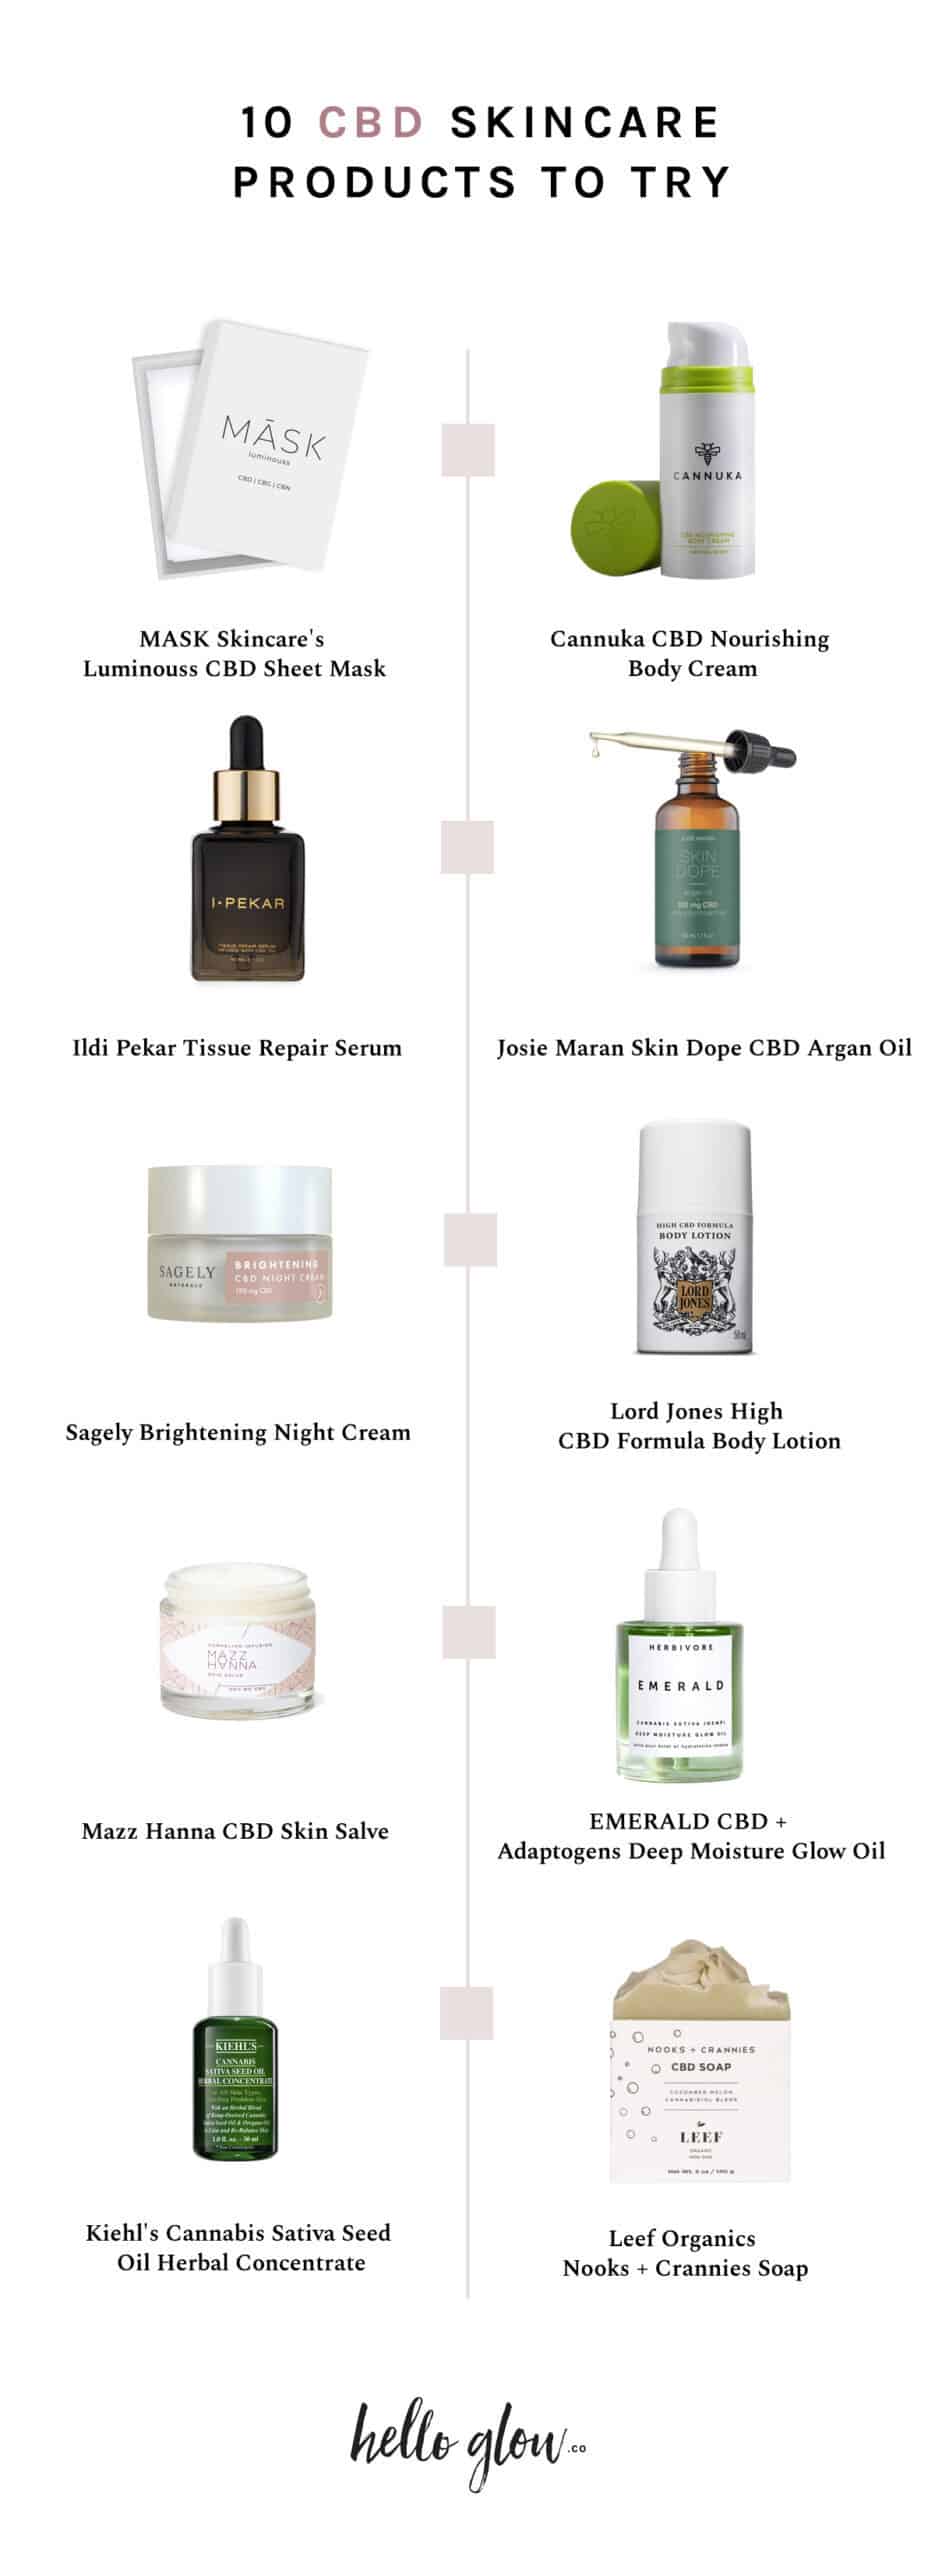 10 CBD Skincare Products to Try - HelloGlow.co